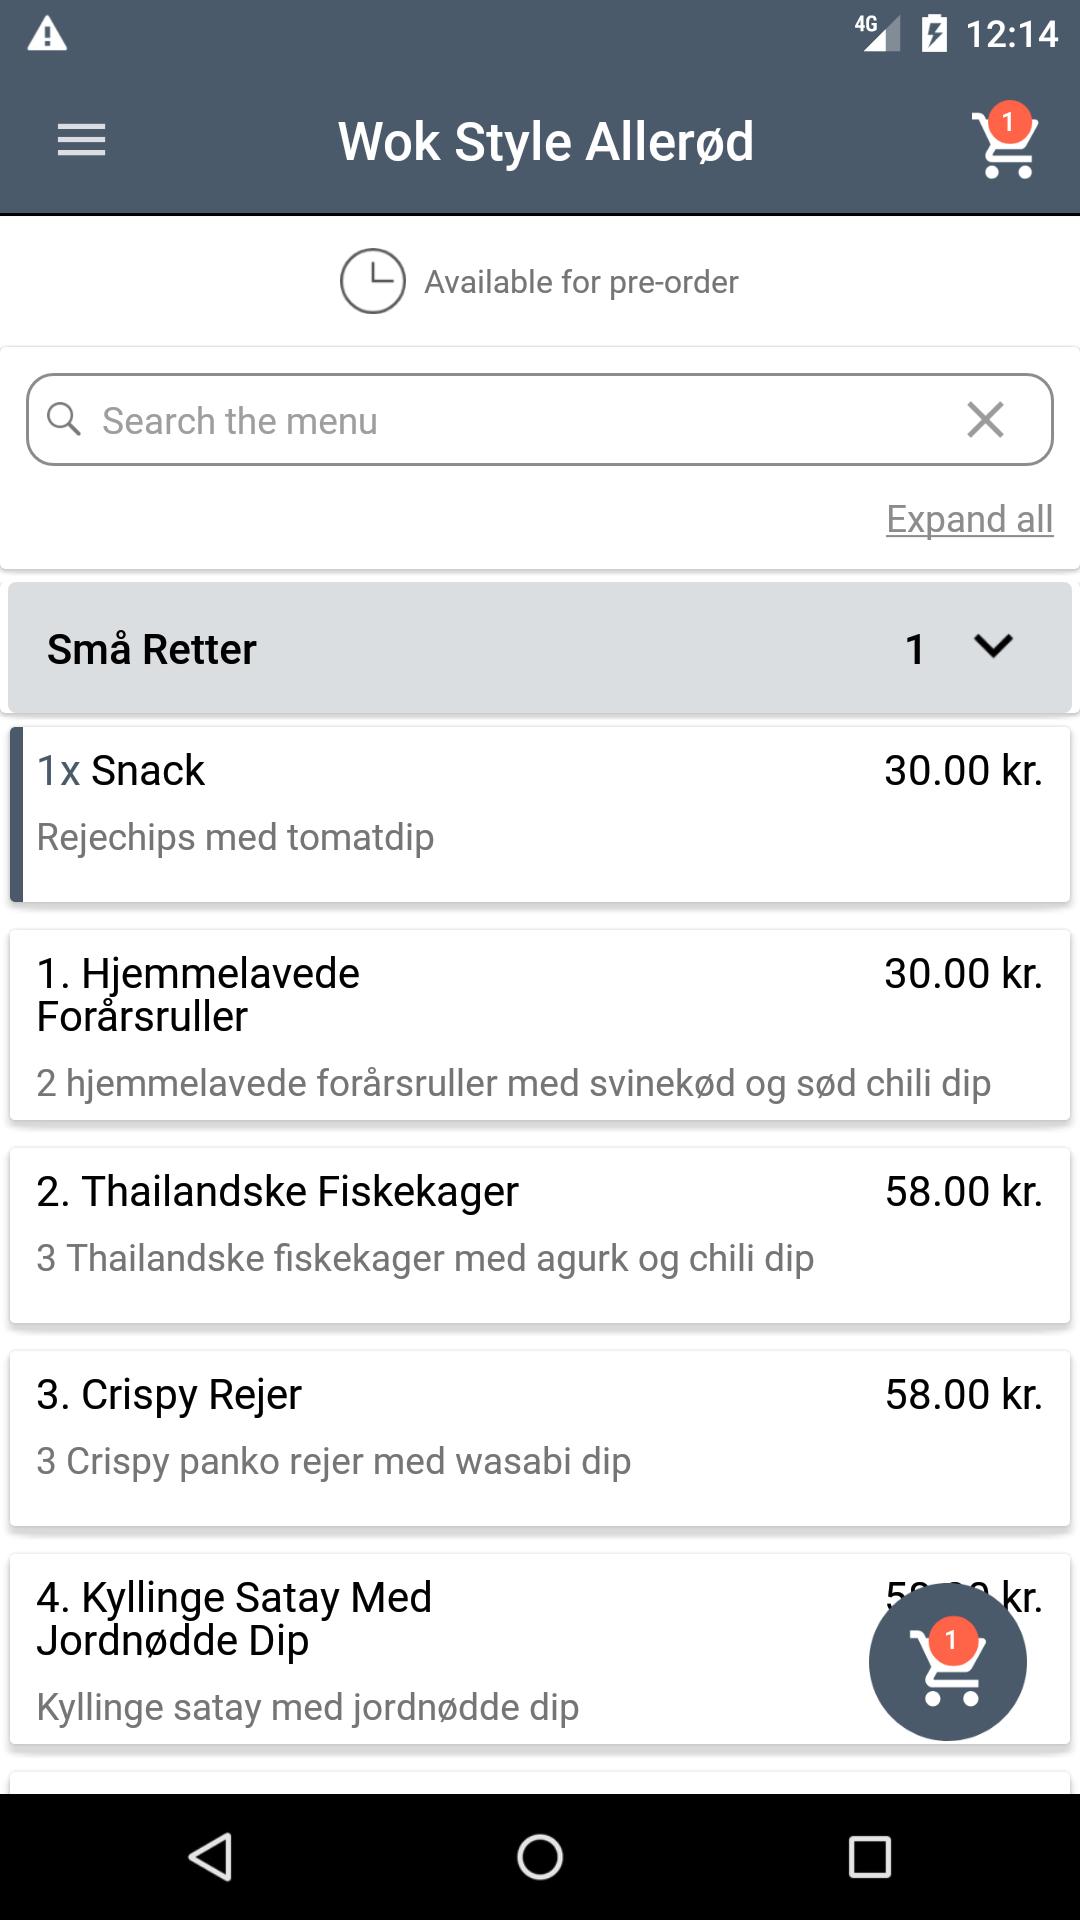 Wok Style Allerød for Android - APK Download